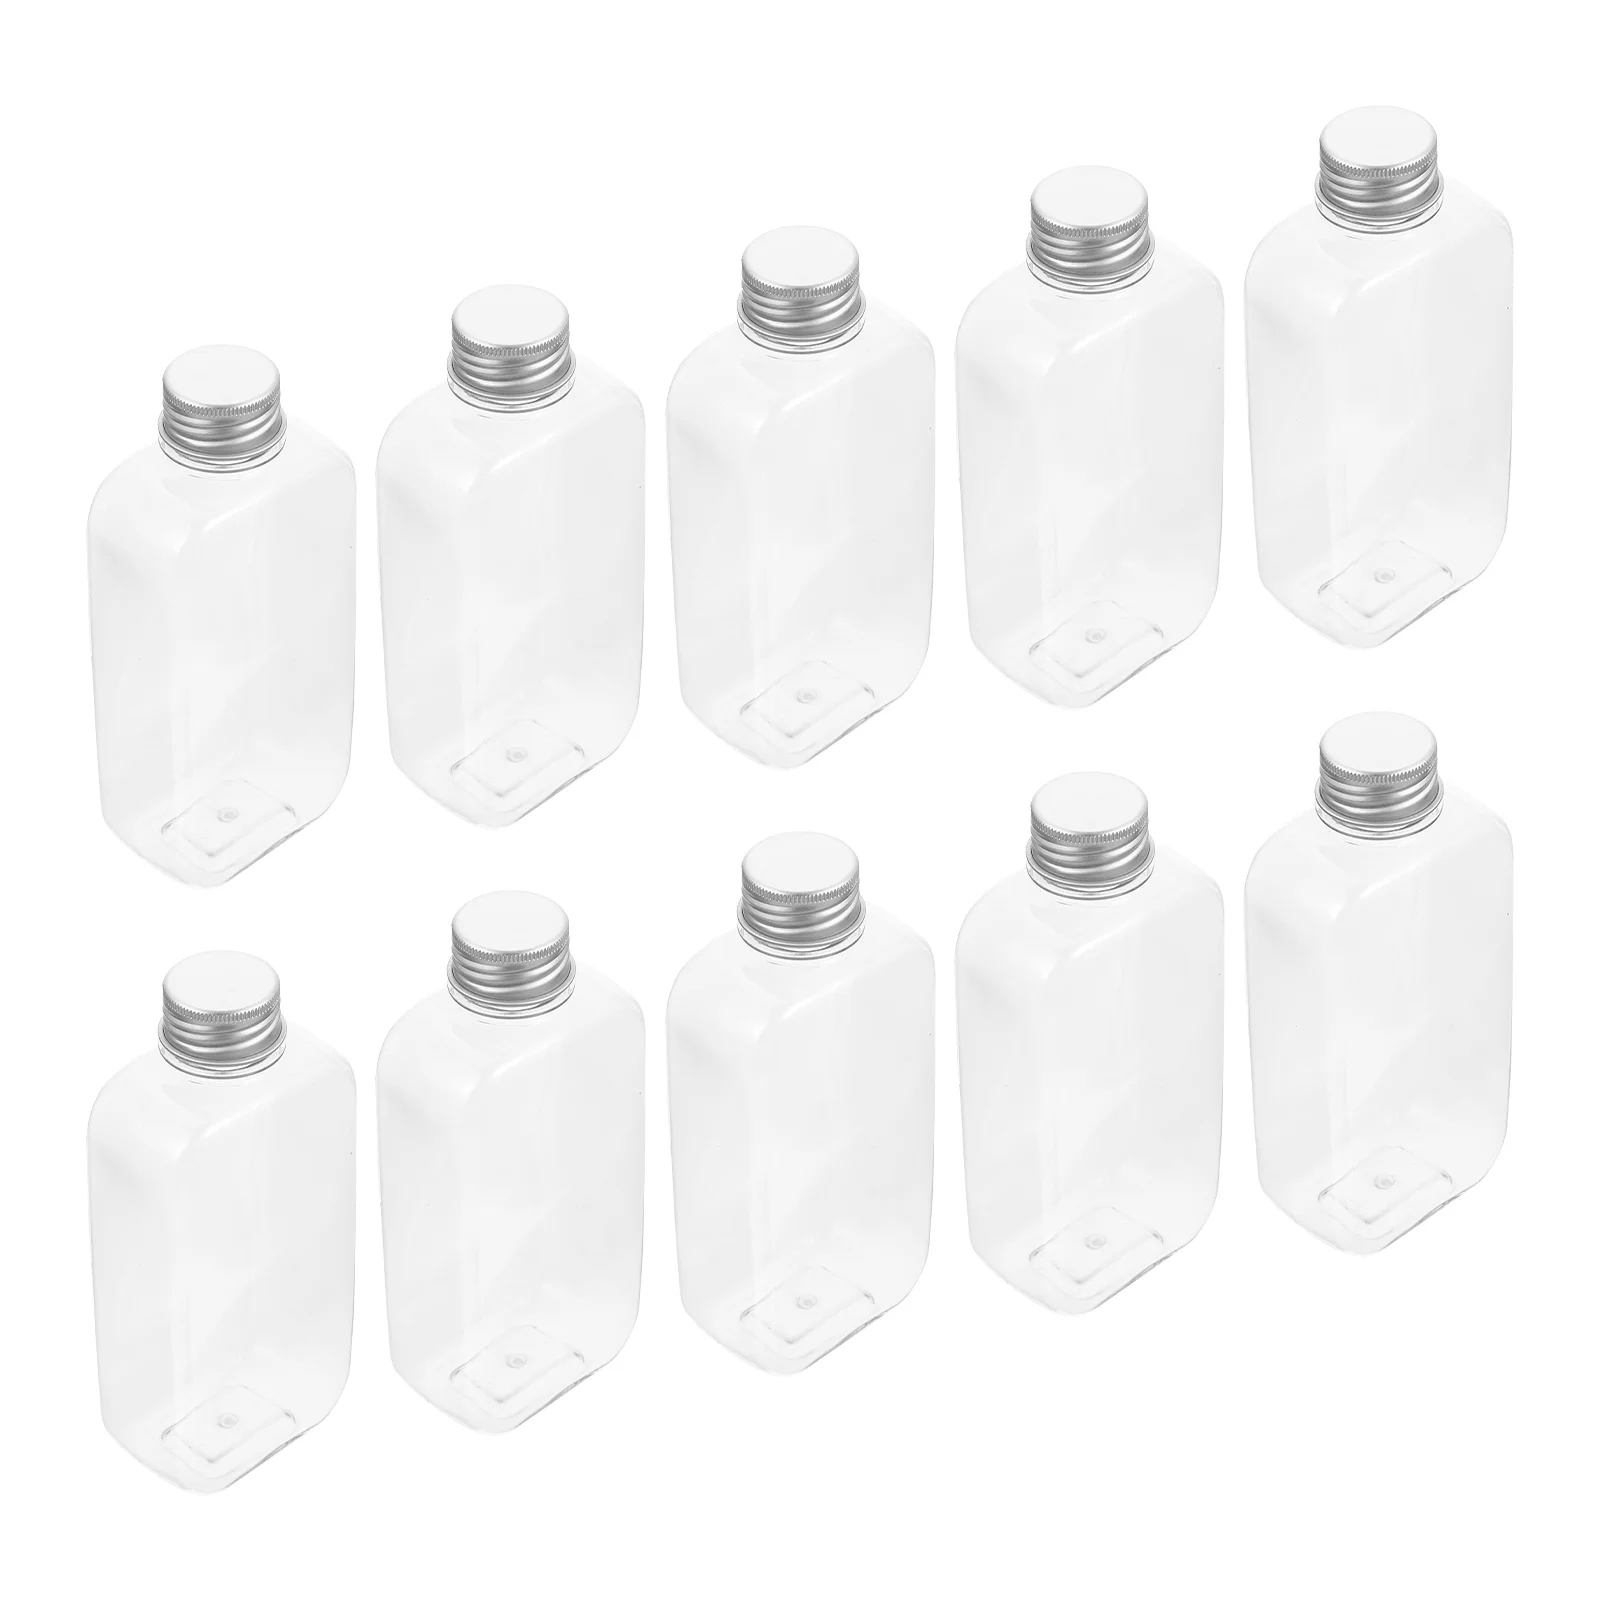 

10pcs Drinks Bottles 350ml Empty Bottles Reusable Clear Disposable Bottles Beverage Bottles Containers Jars with Screw- on Lids